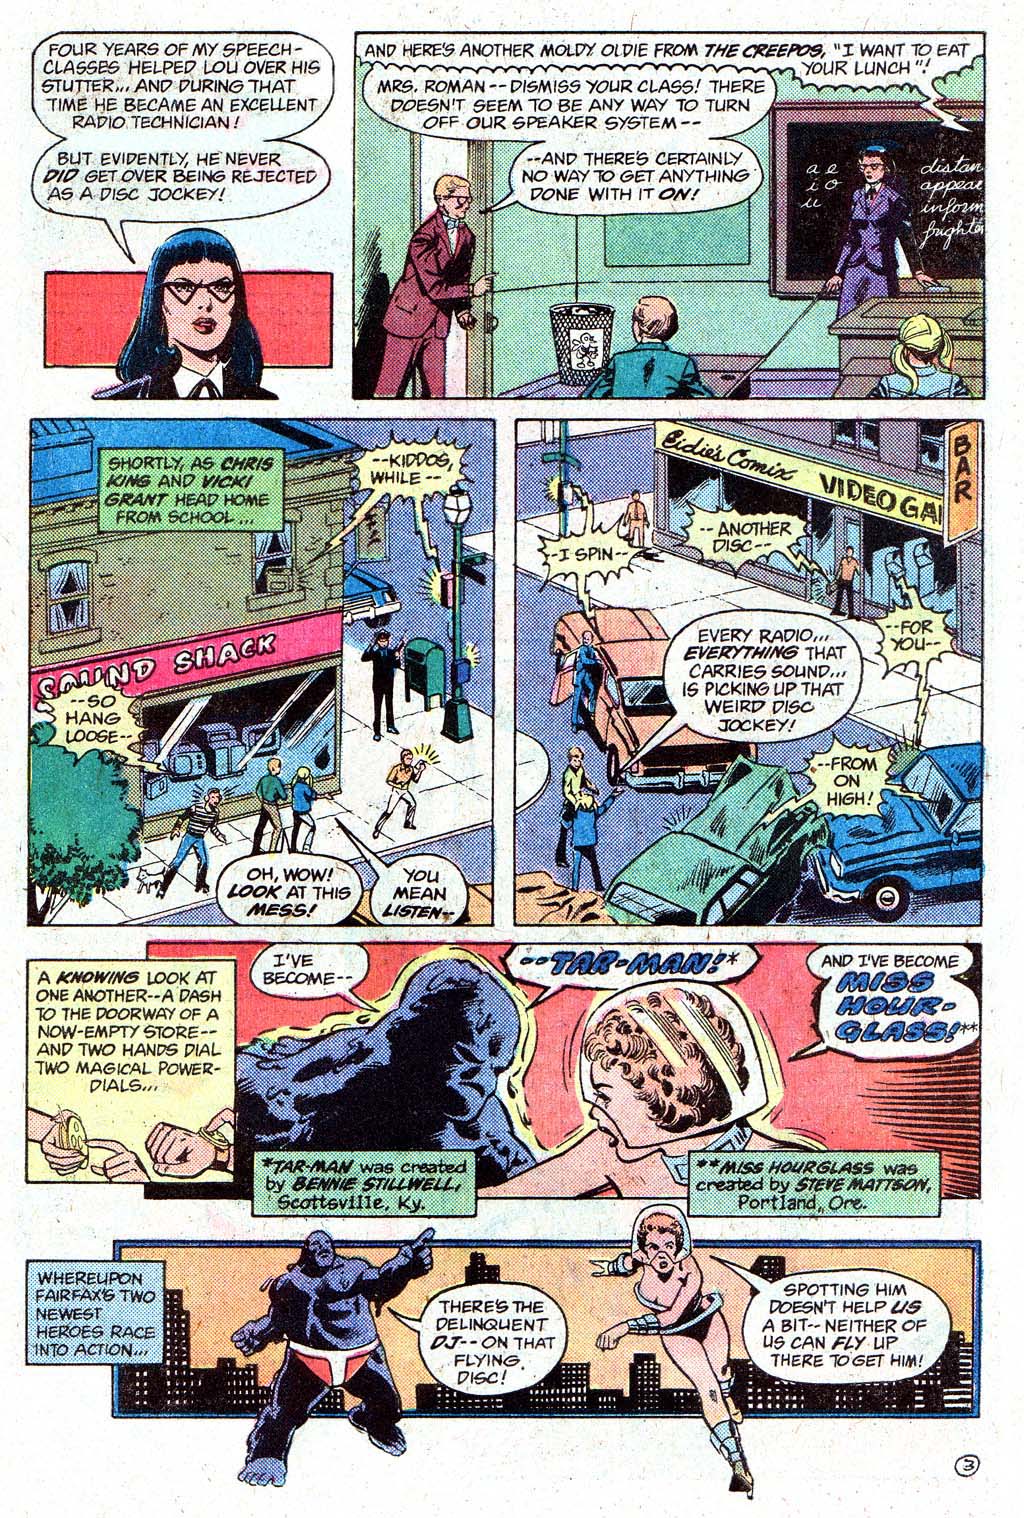 The New Adventures of Superboy 29 Page 26